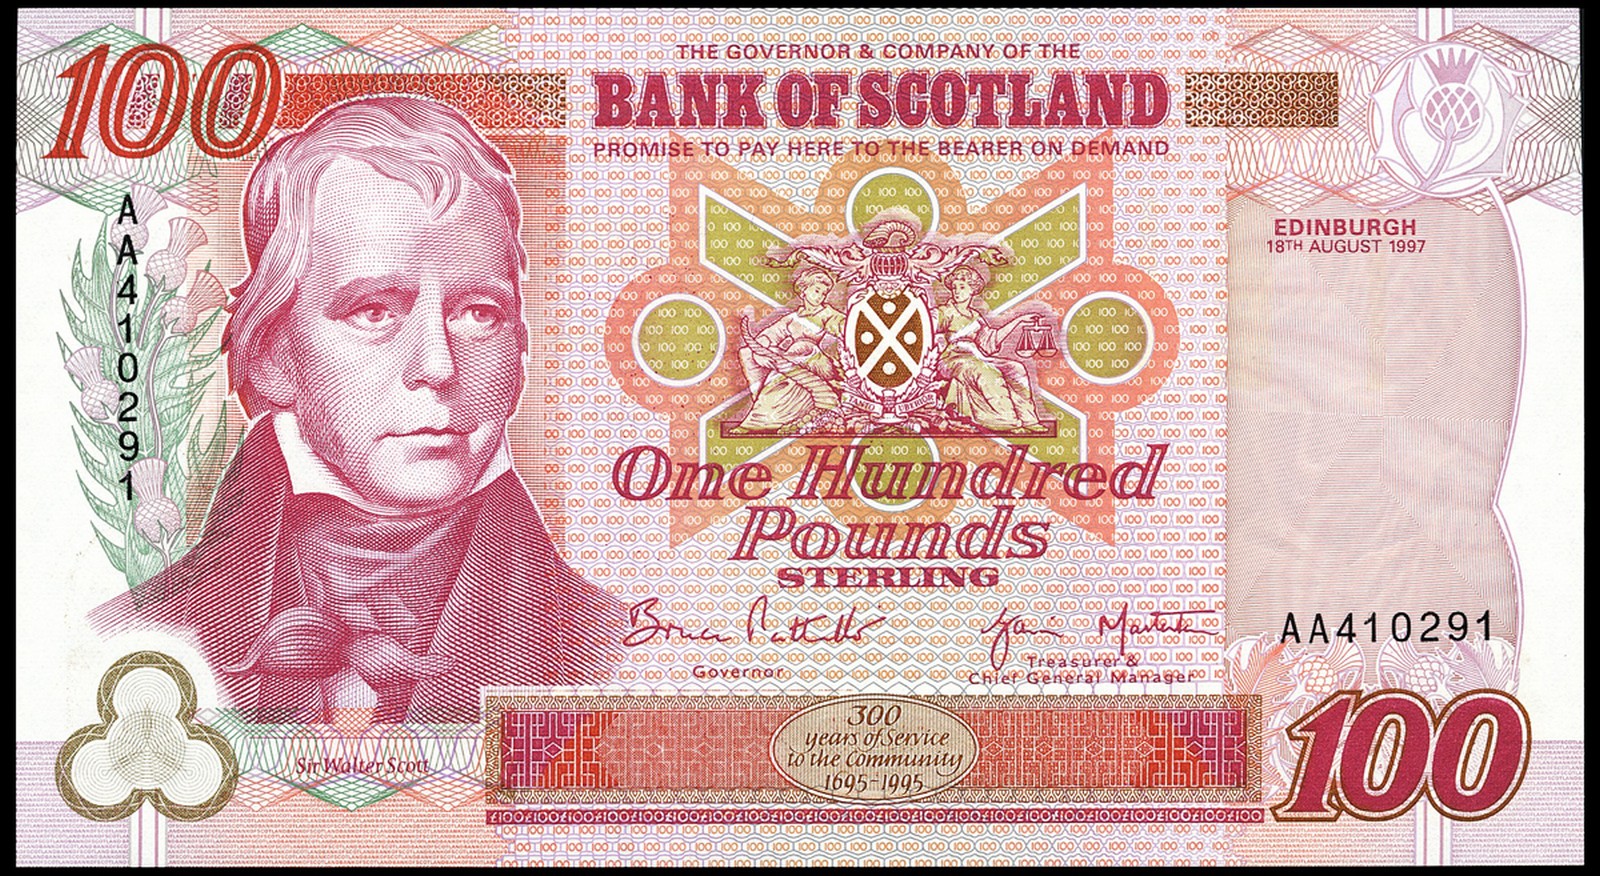 BRITISH BANKNOTES, Bank of Scotland, One Hundred Pounds, 18 August 1997, AA 410291, Patullo-